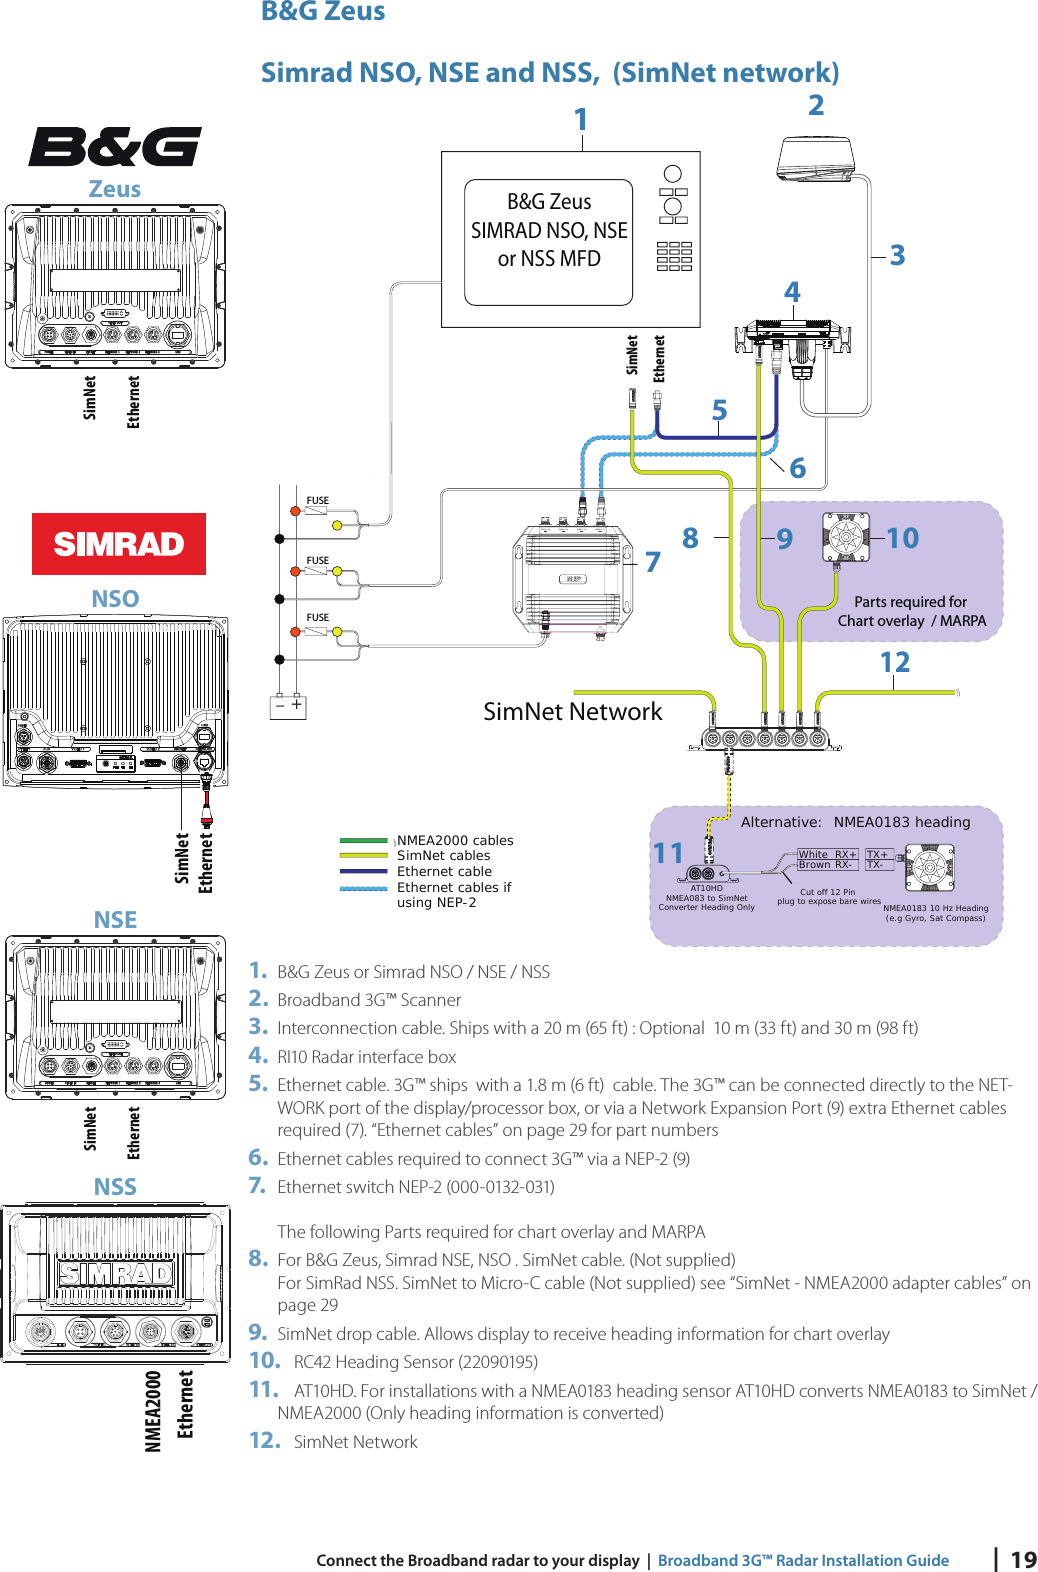 |  19 Connect the Broadband radar to your display  |  Broadband 3G™ Radar Installation GuideB&amp;G ZeusSimrad NSO, NSE and NSS,  (SimNet network)+_NMEA2000 cablesSimNet cablesEthernet cableEthernet cables ifusing NEP-2FUSEFUSEFUSE7465879121032Parts required for Chart overlay  / MARPASimNet NetworkBrown RX-White RX+AT10HDNMEA083 to SimNetConverter Heading OnlyCut off 12 Pin plug to expose bare wires NMEA0183 10 Hz Heading(e.g Gyro, Sat Compass)Alternative:  NMEA0183 headingTX-TX+111SimNetEthernetB&amp;G ZeusSIMRAD NSO, NSEor NSS MFD1.  B&amp;G Zeus or Simrad NSO / NSE / NSS2.  Broadband 3G™ Scanner3.  Interconnection cable. Ships with a 20 m (65 ft) : Optional  10 m (33 ft) and 30 m (98 ft)4.  RI10 Radar interface box5.  Ethernet cable. 3G™ ships  with a 1.8 m (6 ft)  cable. The 3G™ can be connected directly to the NET-WORK port of the display/processor box, or via a Network Expansion Port (9) extra Ethernet cables required (7). “Ethernet cables” on page 29 for part numbers6.  Ethernet cables required to connect 3G™ via a NEP-2 (9)7.   Ethernet switch NEP-2 (000-0132-031)The following Parts required for chart overlay and MARPA8.  For B&amp;G Zeus, Simrad NSE, NSO . SimNet cable. (Not supplied)For SimRad NSS. SimNet to Micro-C cable (Not supplied) see “SimNet - NMEA2000 adapter cables” on page 299.  SimNet drop cable. Allows display to receive heading information for chart overlay 10.  RC42 Heading Sensor (22090195)11.   AT10HD. For installations with a NMEA0183 heading sensor AT10HD converts NMEA0183 to SimNet / NMEA2000 (Only heading information is converted)12.  SimNet NetworkZeusSimNetEthernetNSOSimNetEthernetNSESimNetEthernetNSSNMEA2000Ethernet